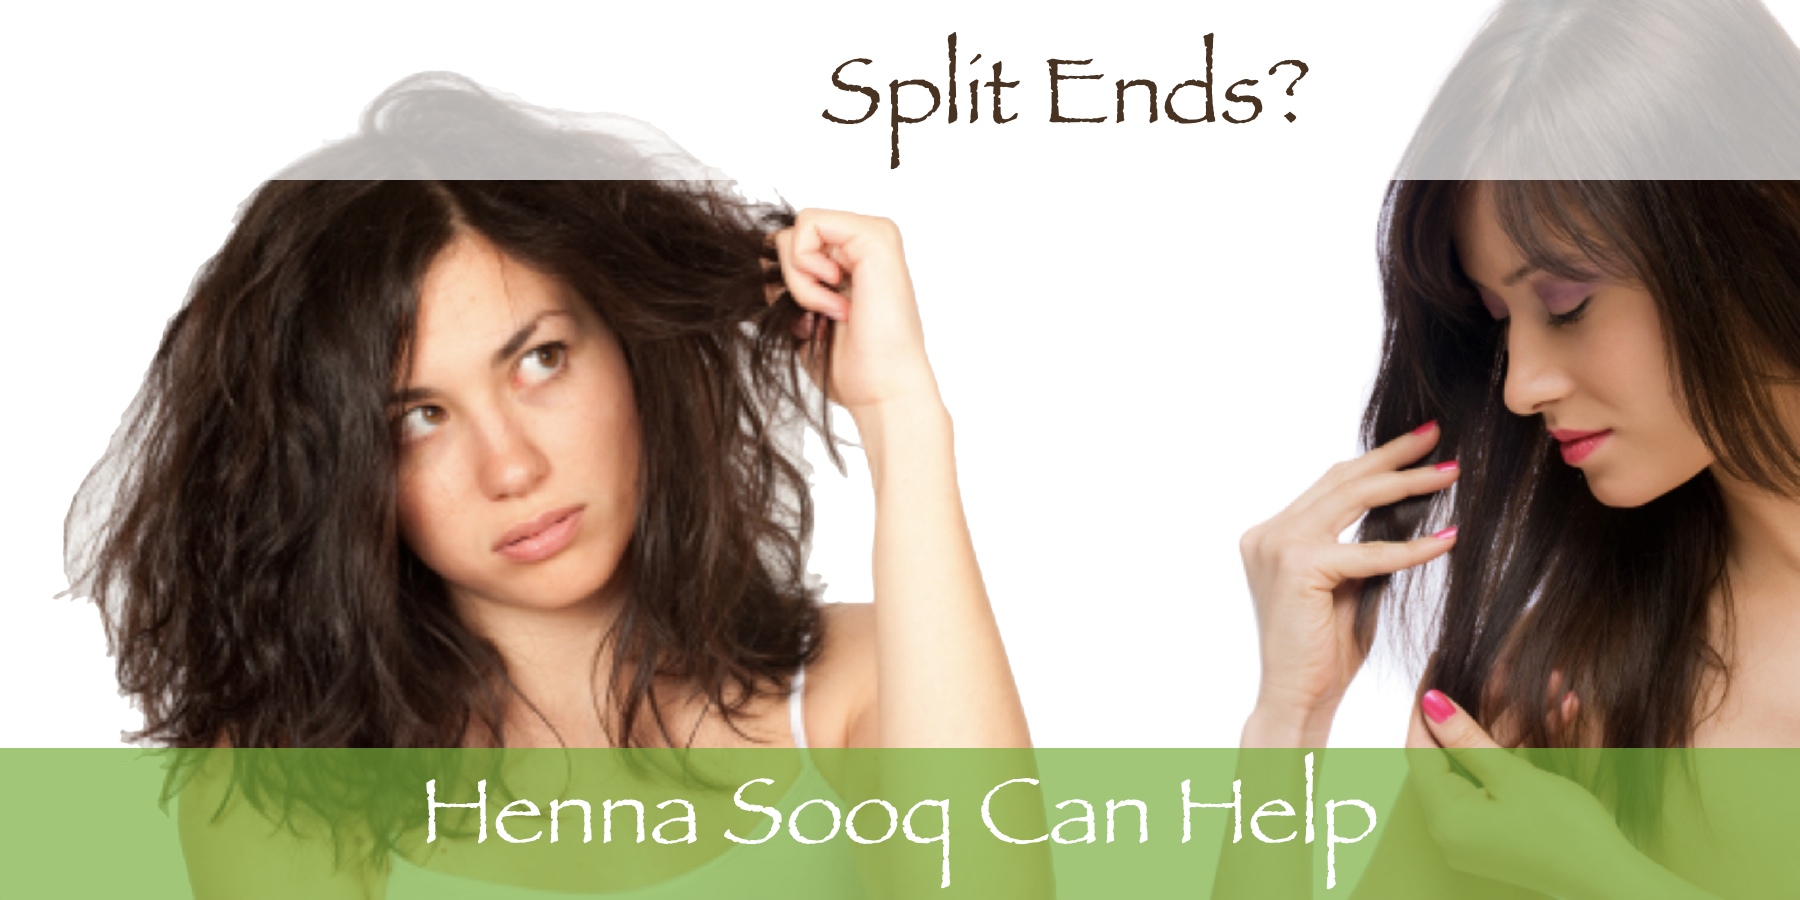 Suffering from Split Ends? We got the fix for you!